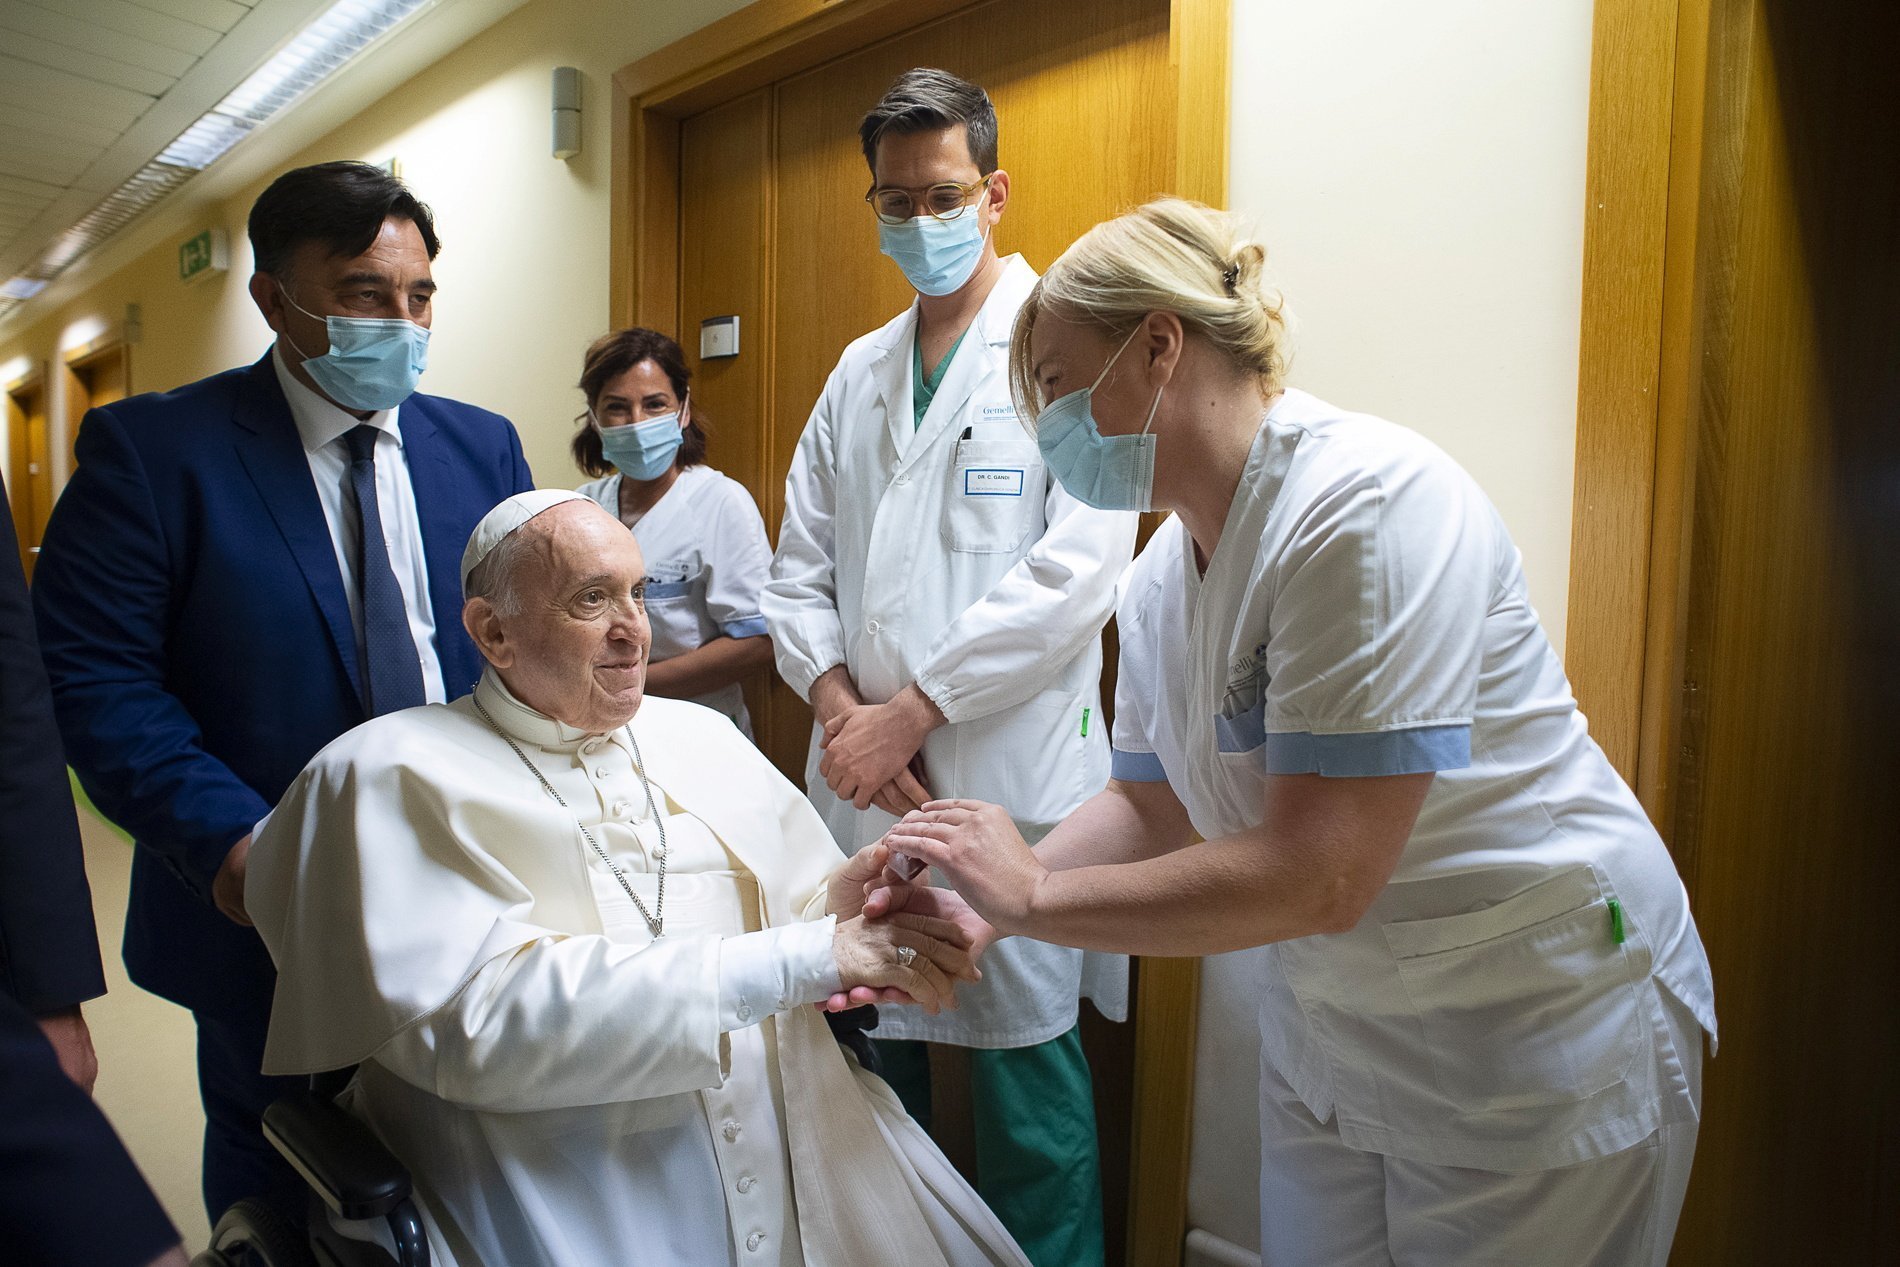 Pope Francis gives a rosary to a member of the medical staff at Gemelli hospital in Rome July 11, 2021, as he recovers following scheduled colon surgery. The pope was in the hospital for 10 days. (CNS photo/Vatican Media via Reuters)